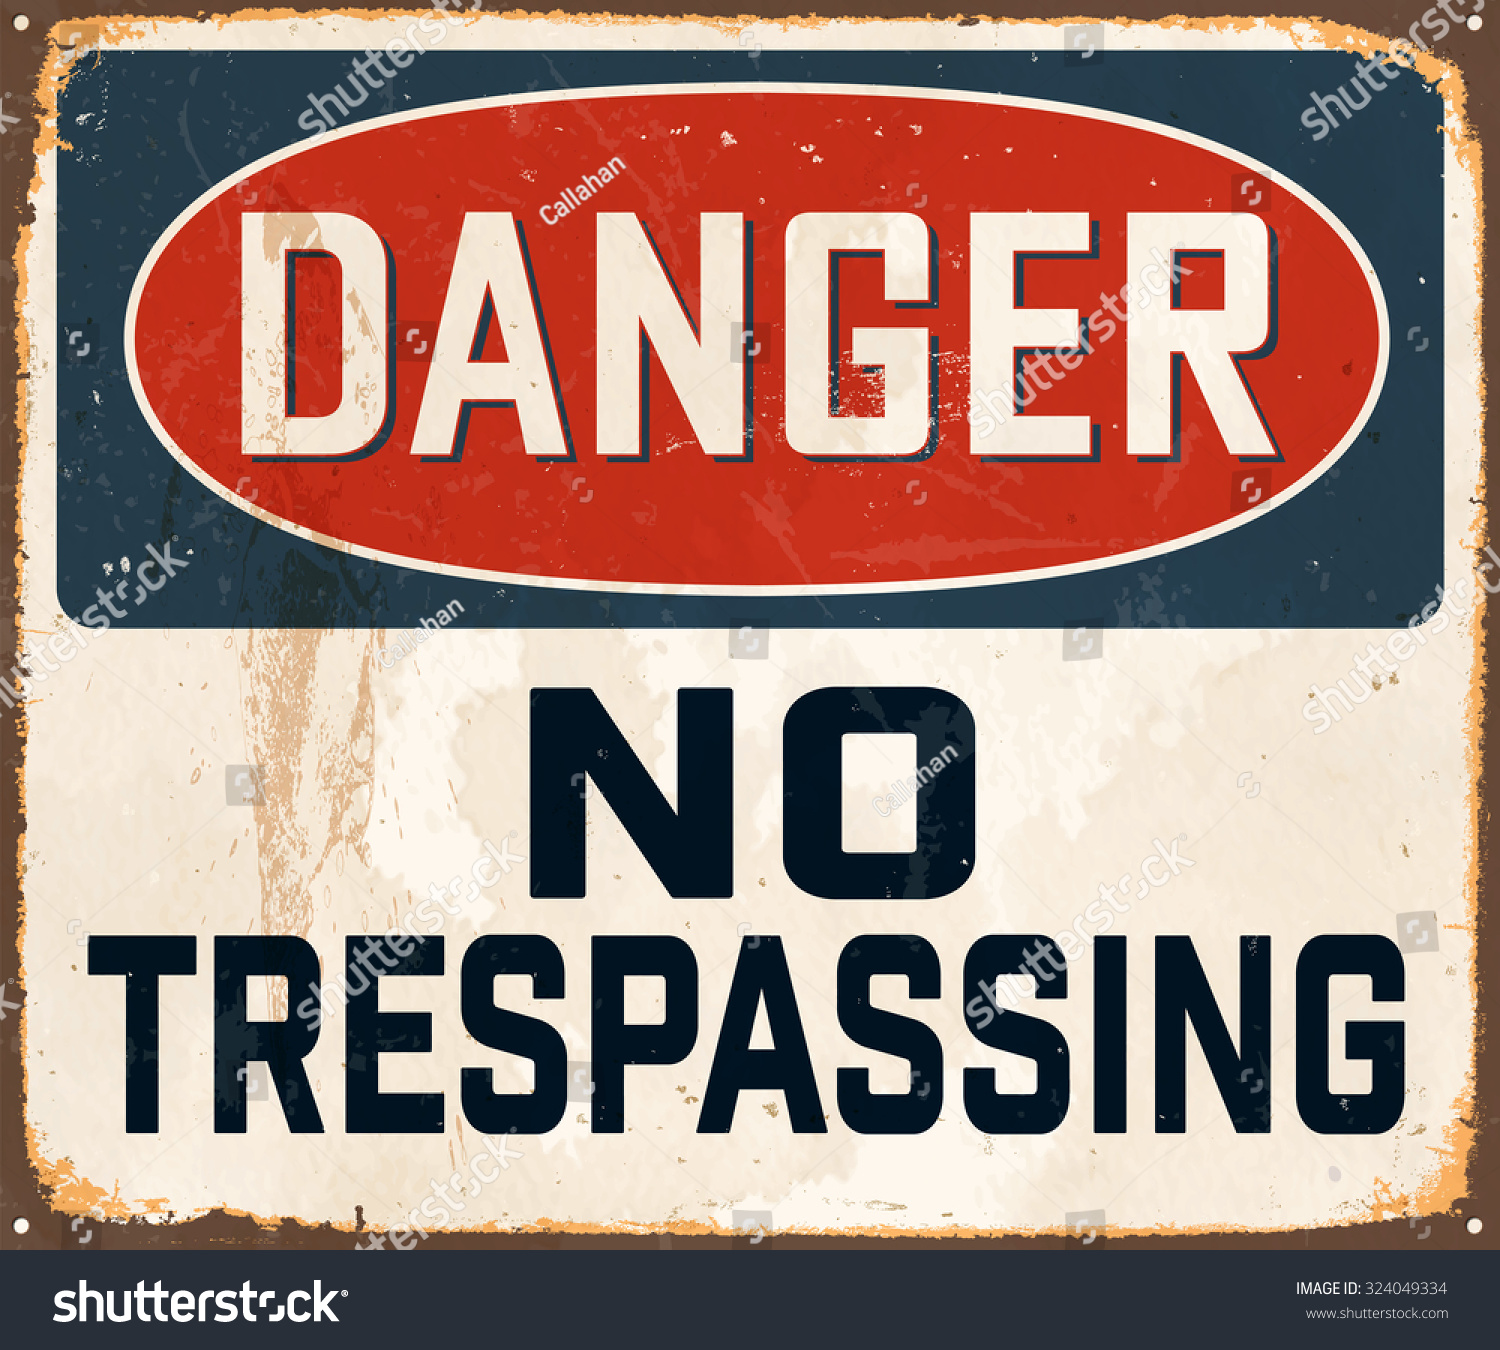 OWNER IS ARMED NO TRESPASS SIGN DURABLE ALUMINUM NO RUST FULL COLOR Sign NT #500 